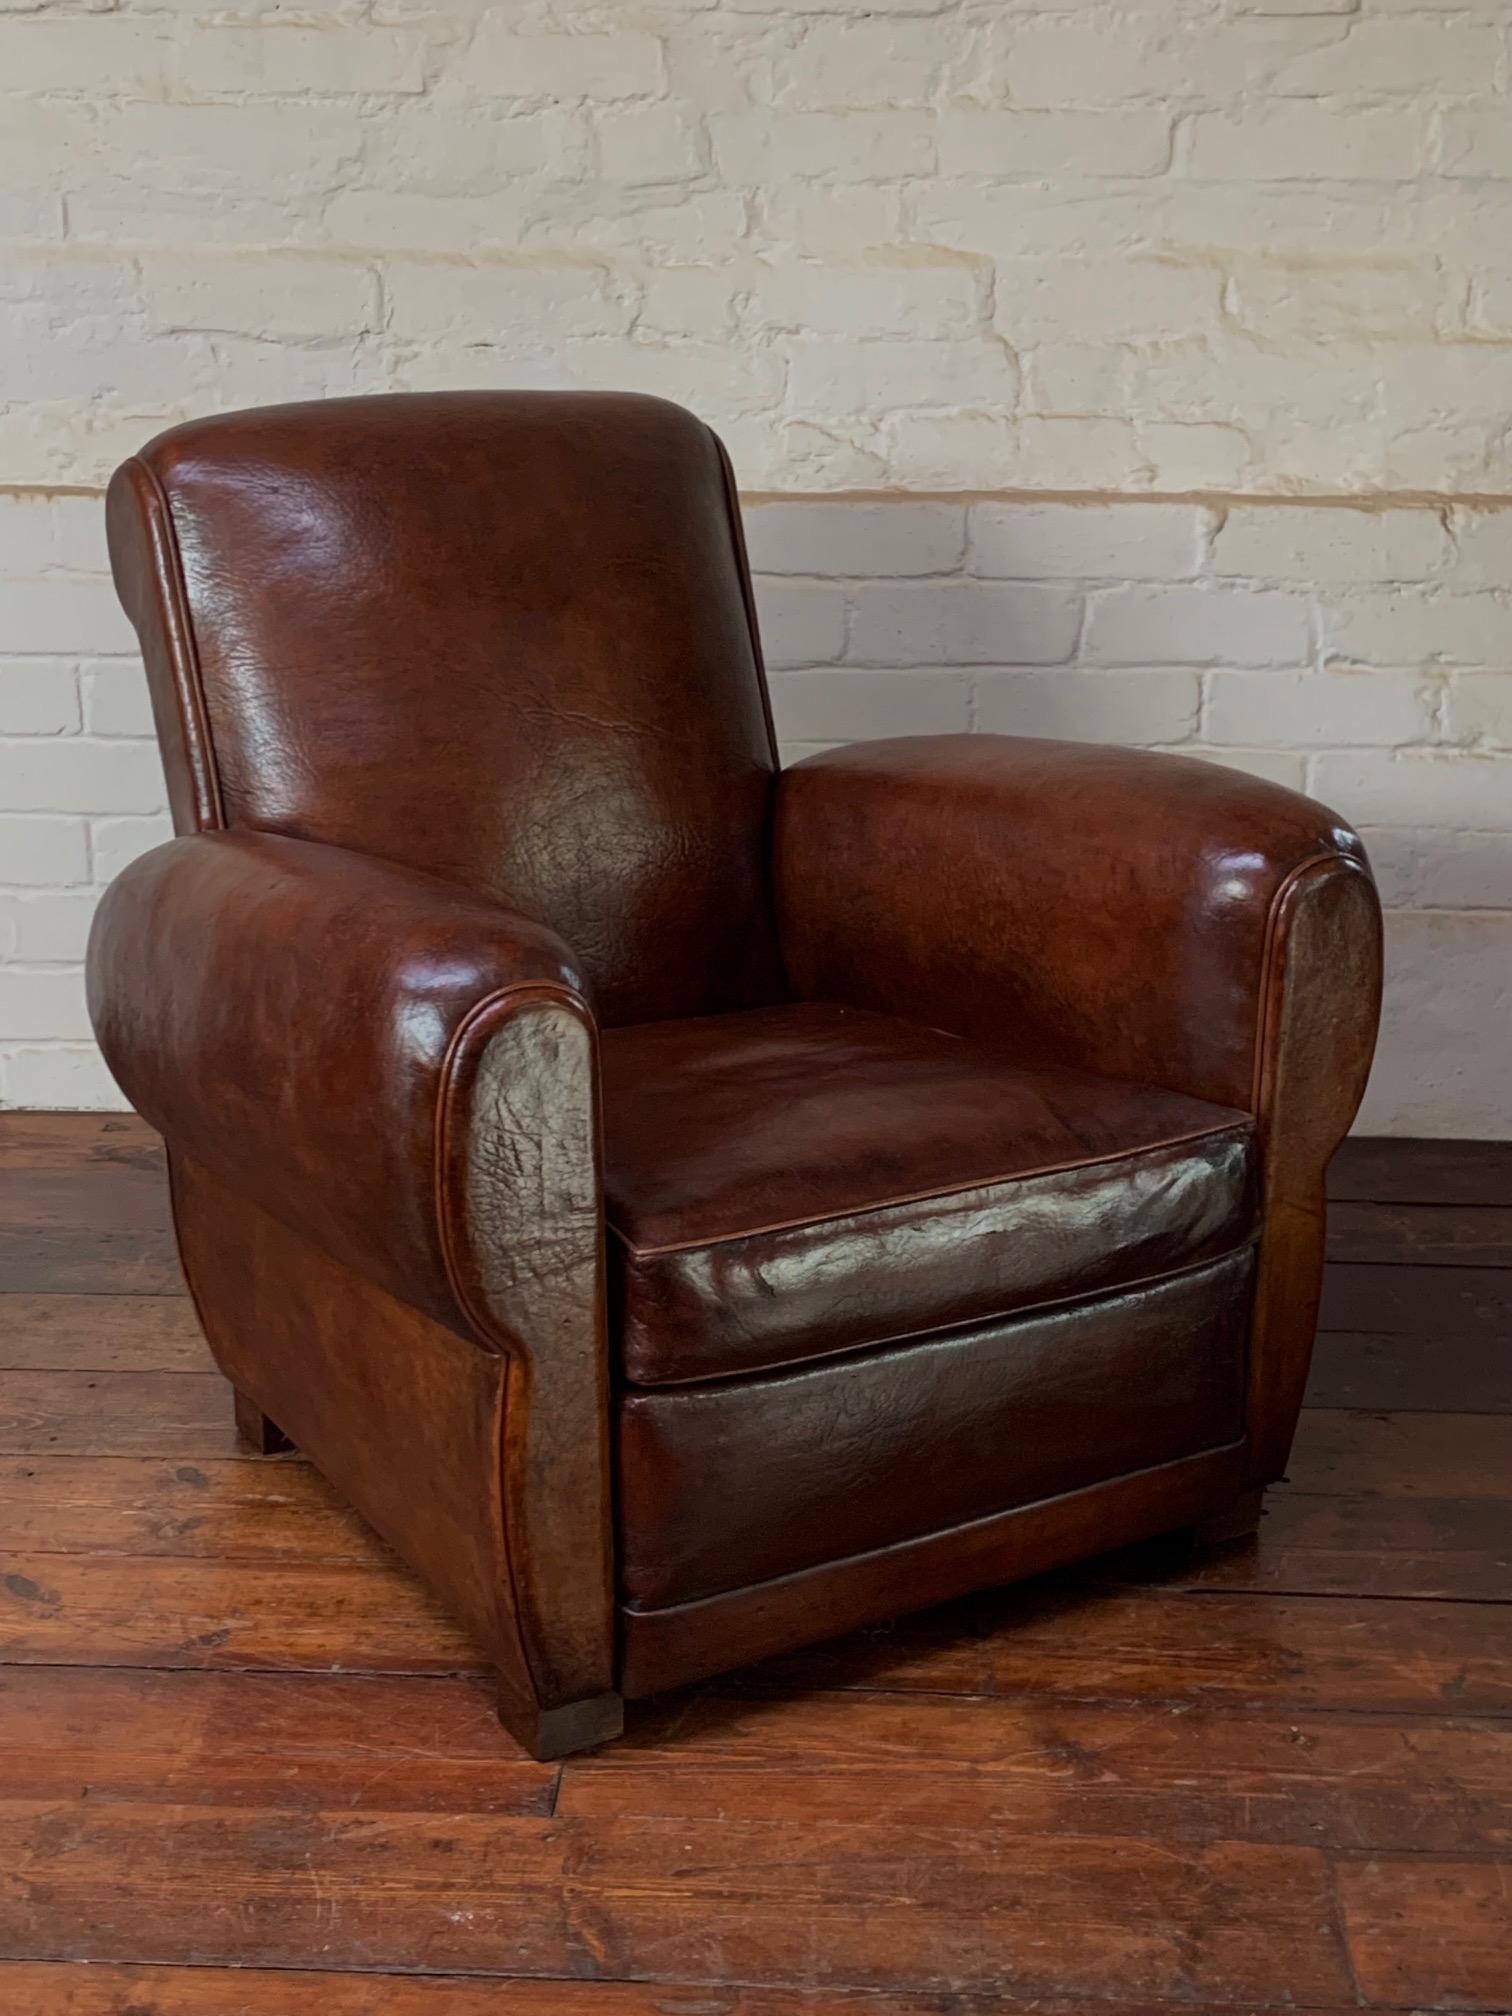 This classic original French leather club chair is a beautiful example. The thick Havana brown leather, after cleaning and nourishment has revealed a beautiful depth of colour. This chair looks great from every angle, and even the back is